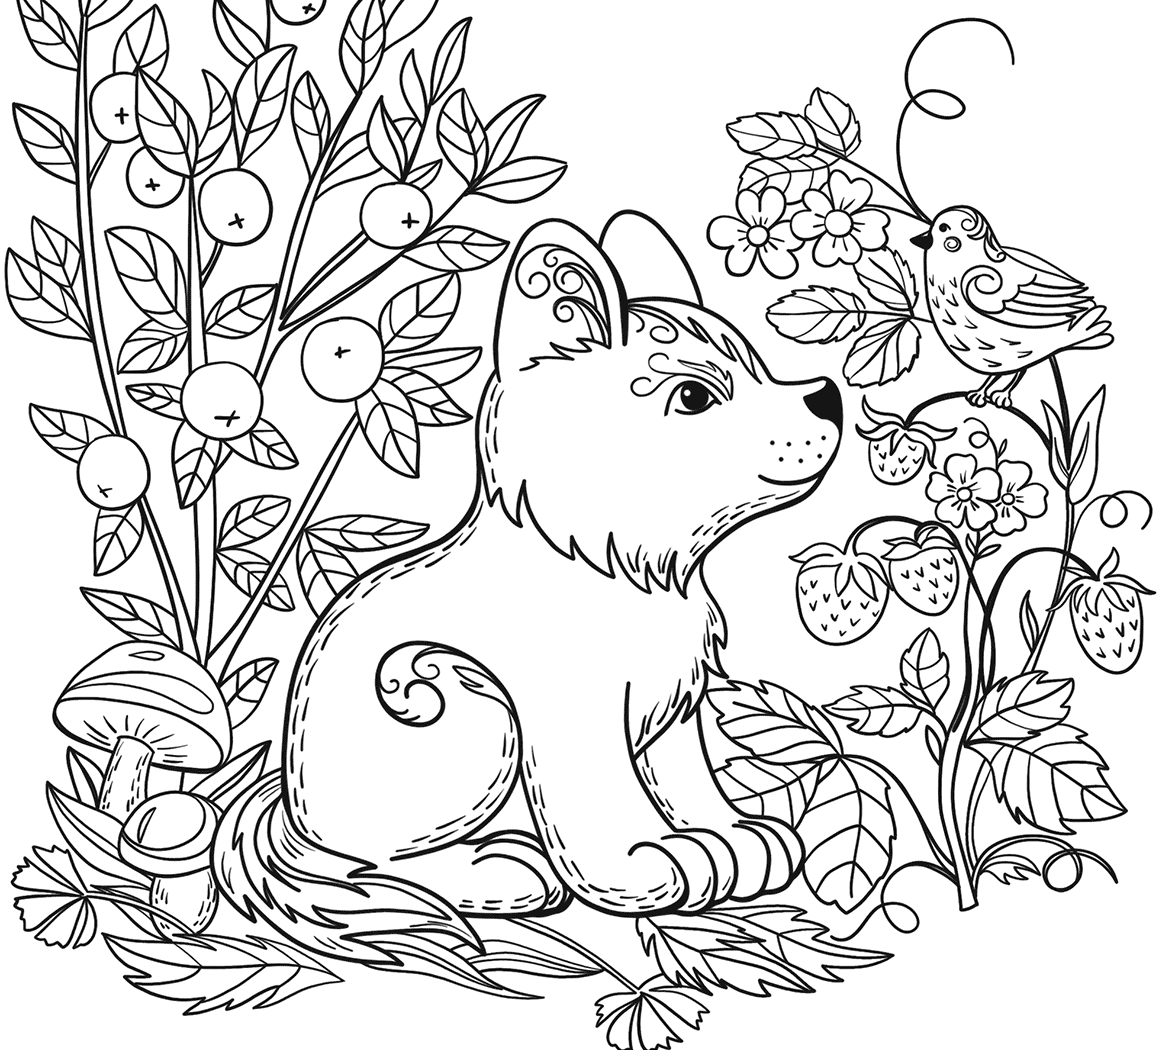 Realistic Wild Animal Coloring Pages - Realistic images of wild animals